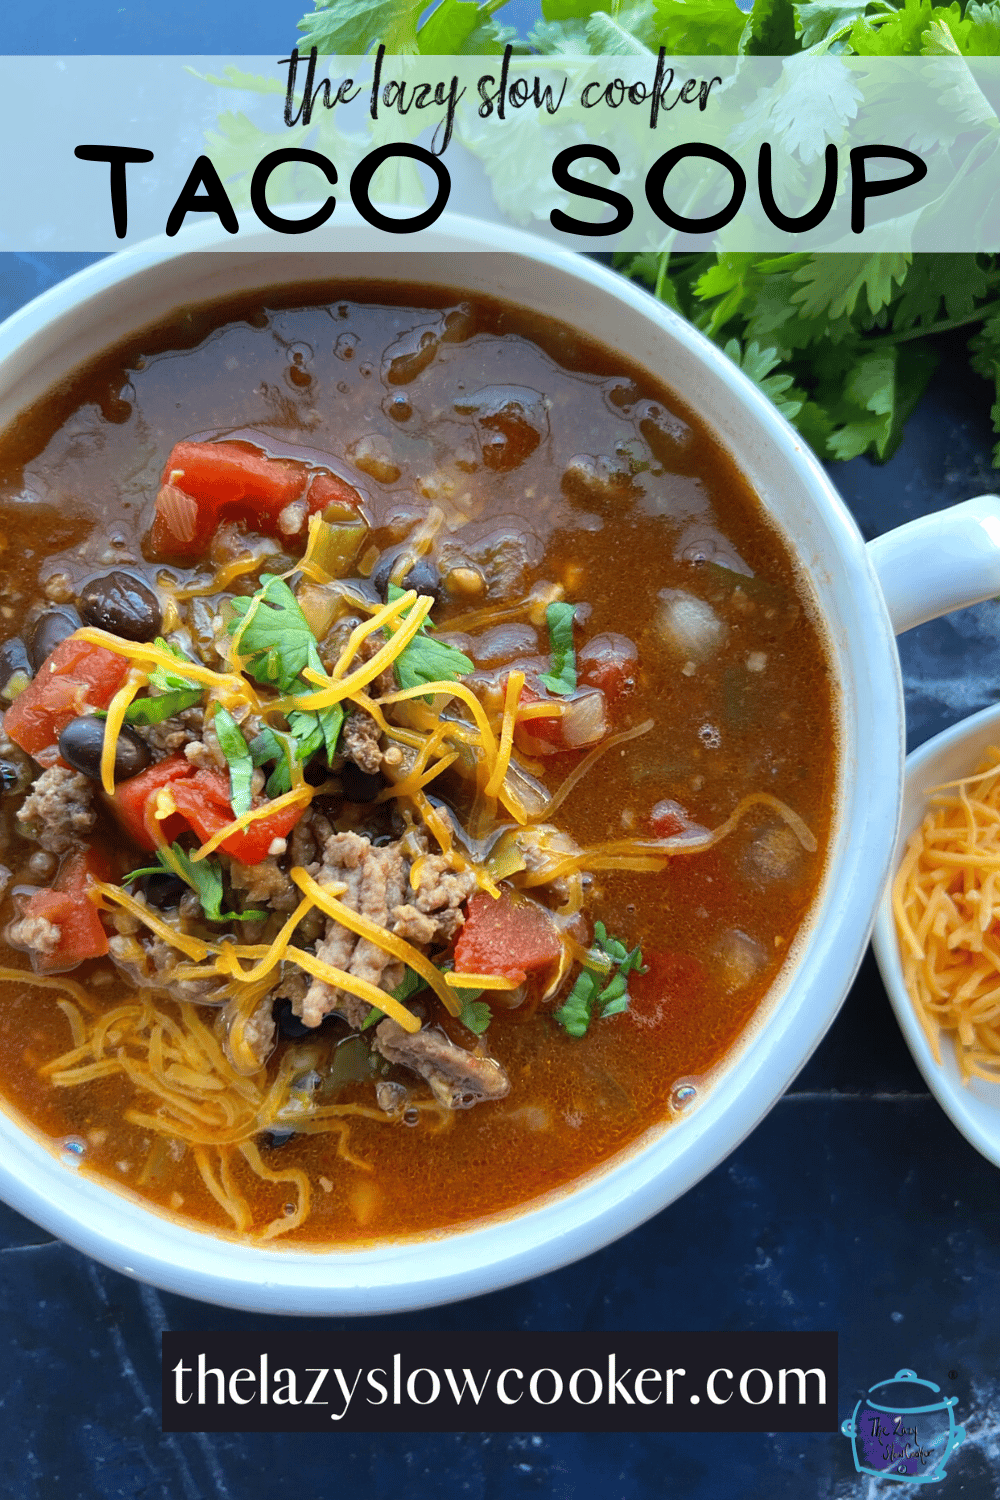 Lazy Slow Cooker Taco Soup - The Lazy Slow Cooker